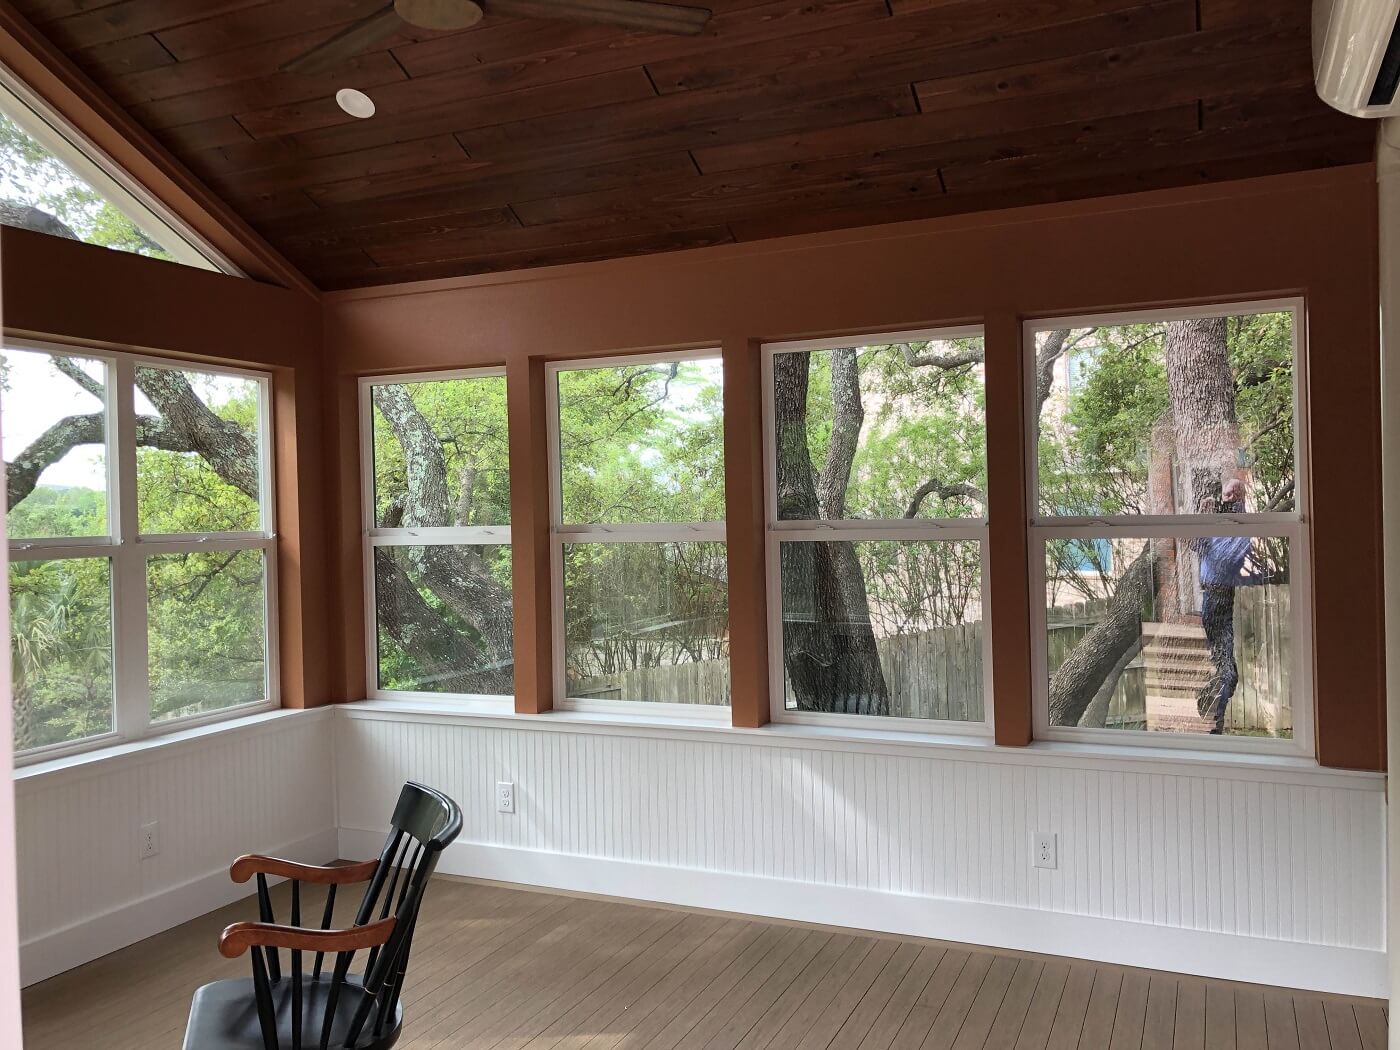 Interior view of sunroom with rocking chair